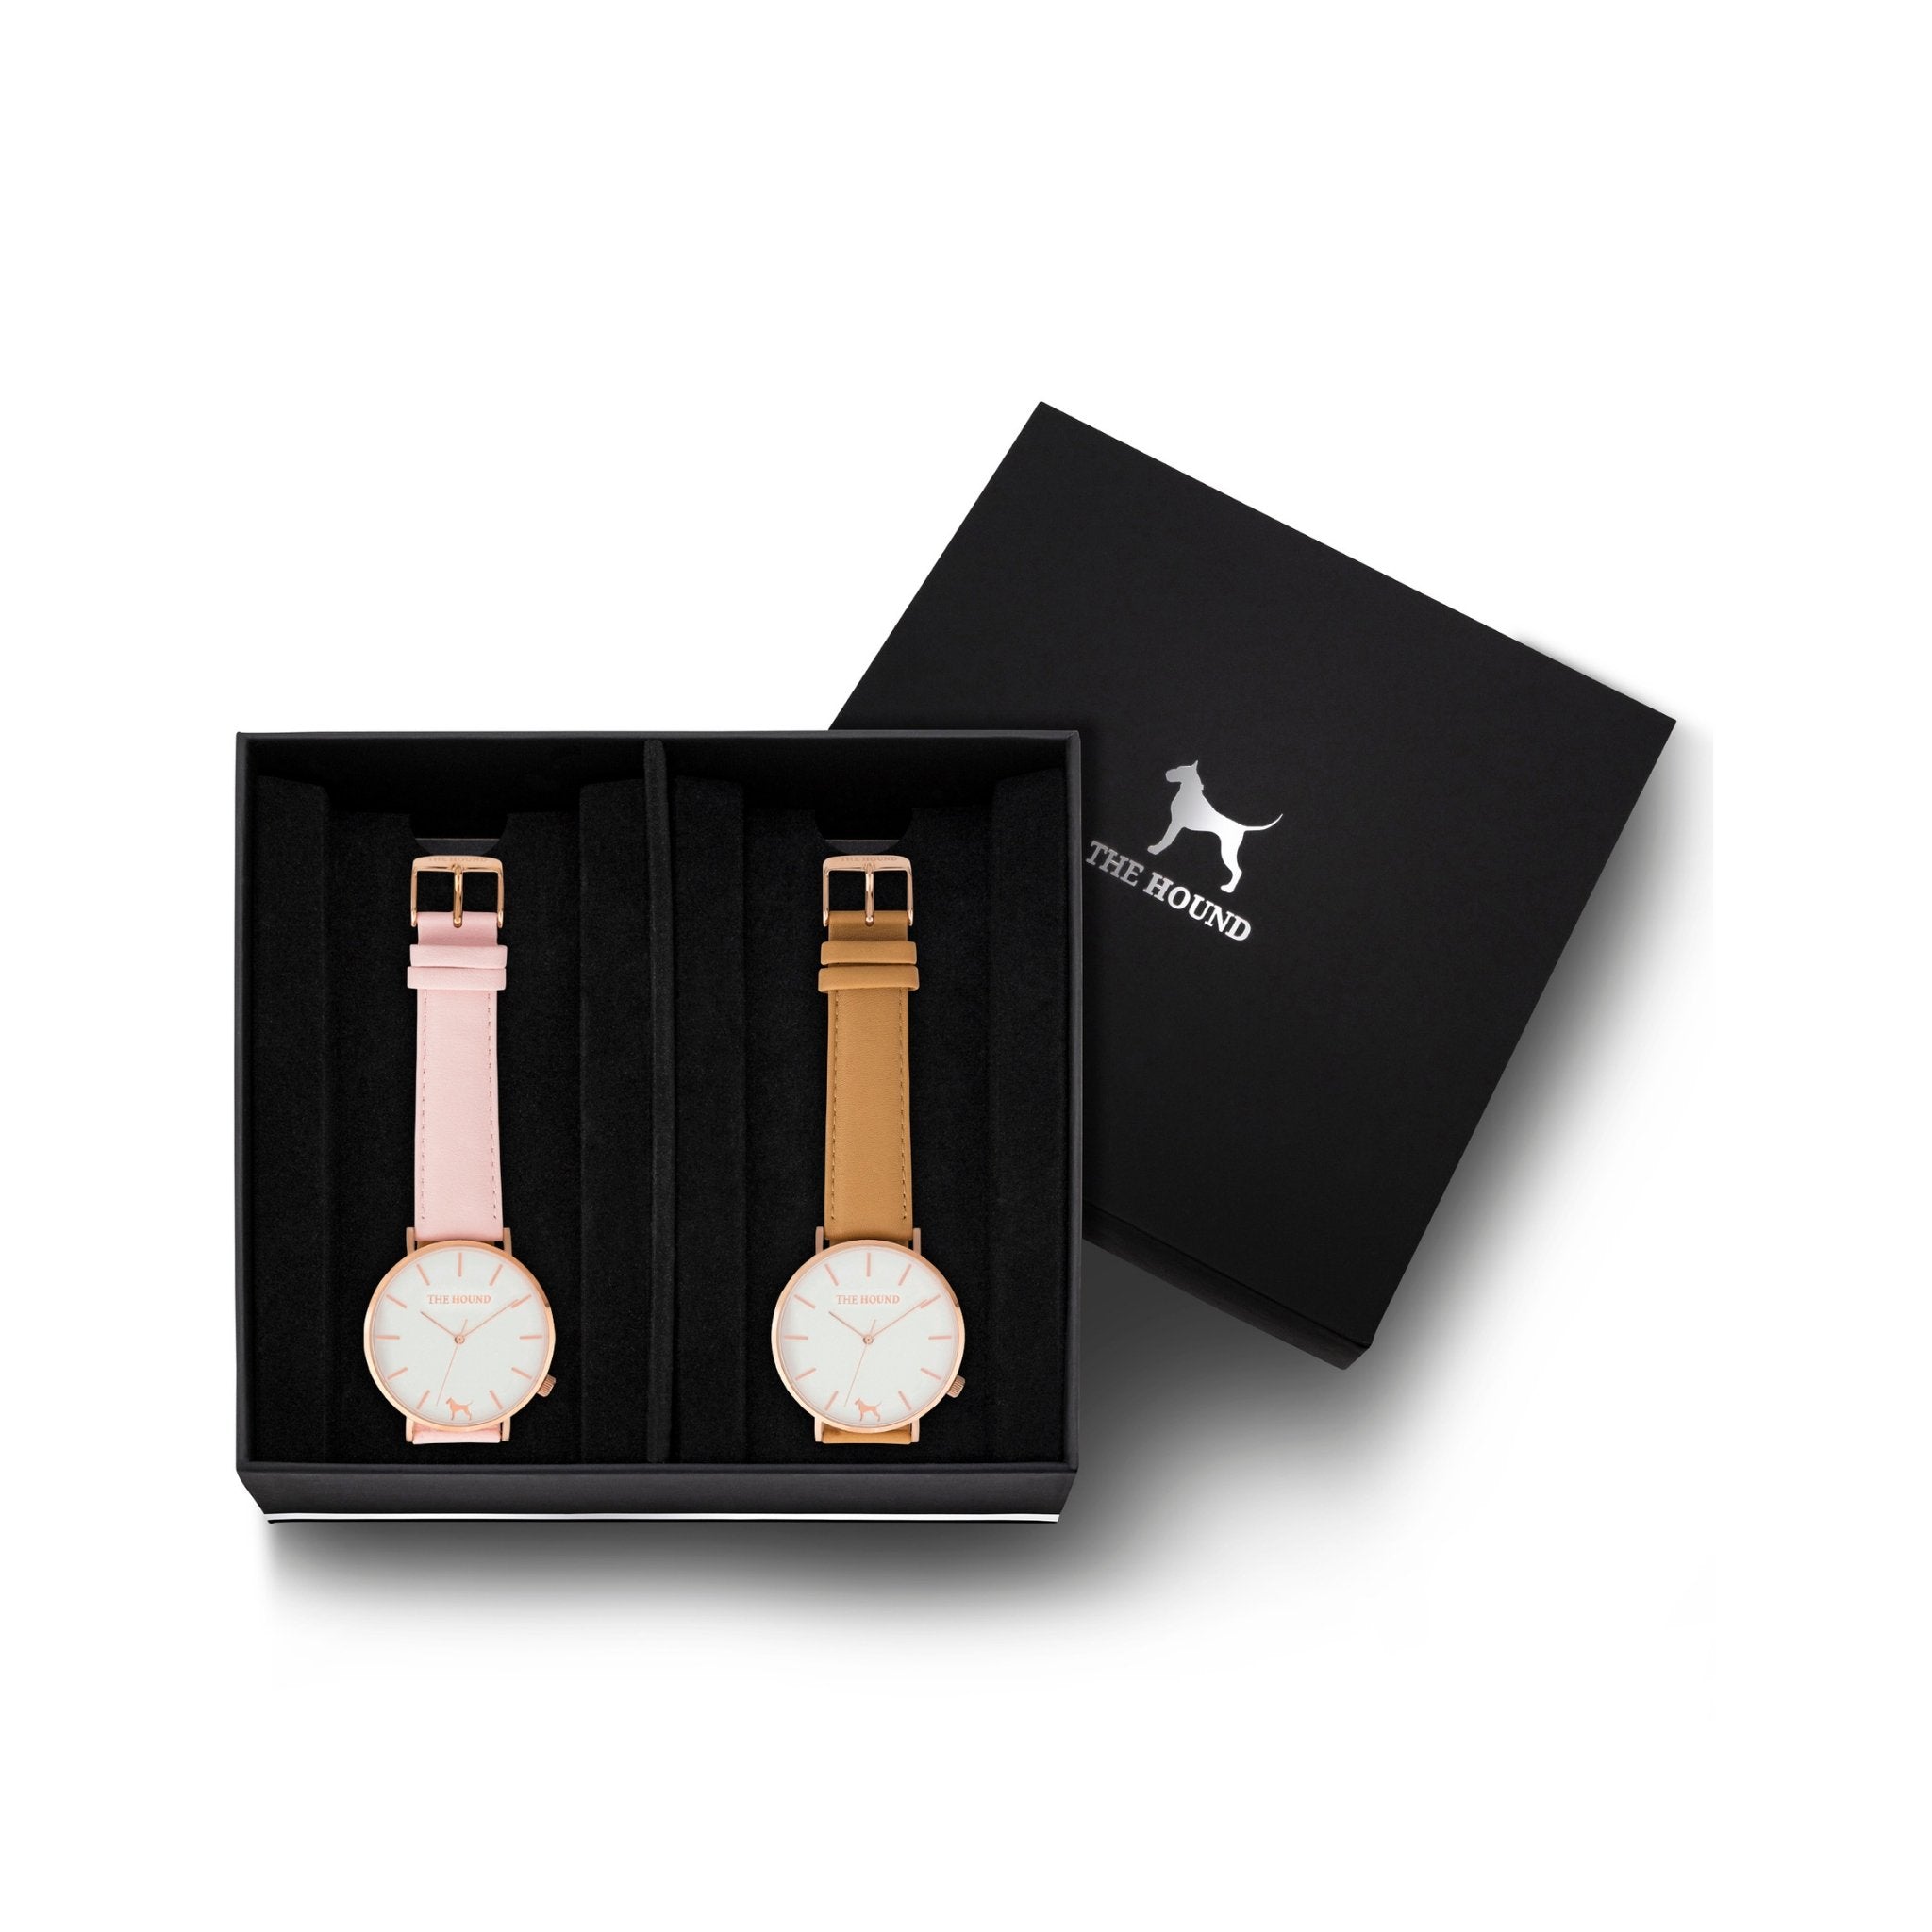 Custom gift set - Rose gold and white watch with stitched blush pink genuine leather band and a rose gold and white watch with stitched camel genuine leather band